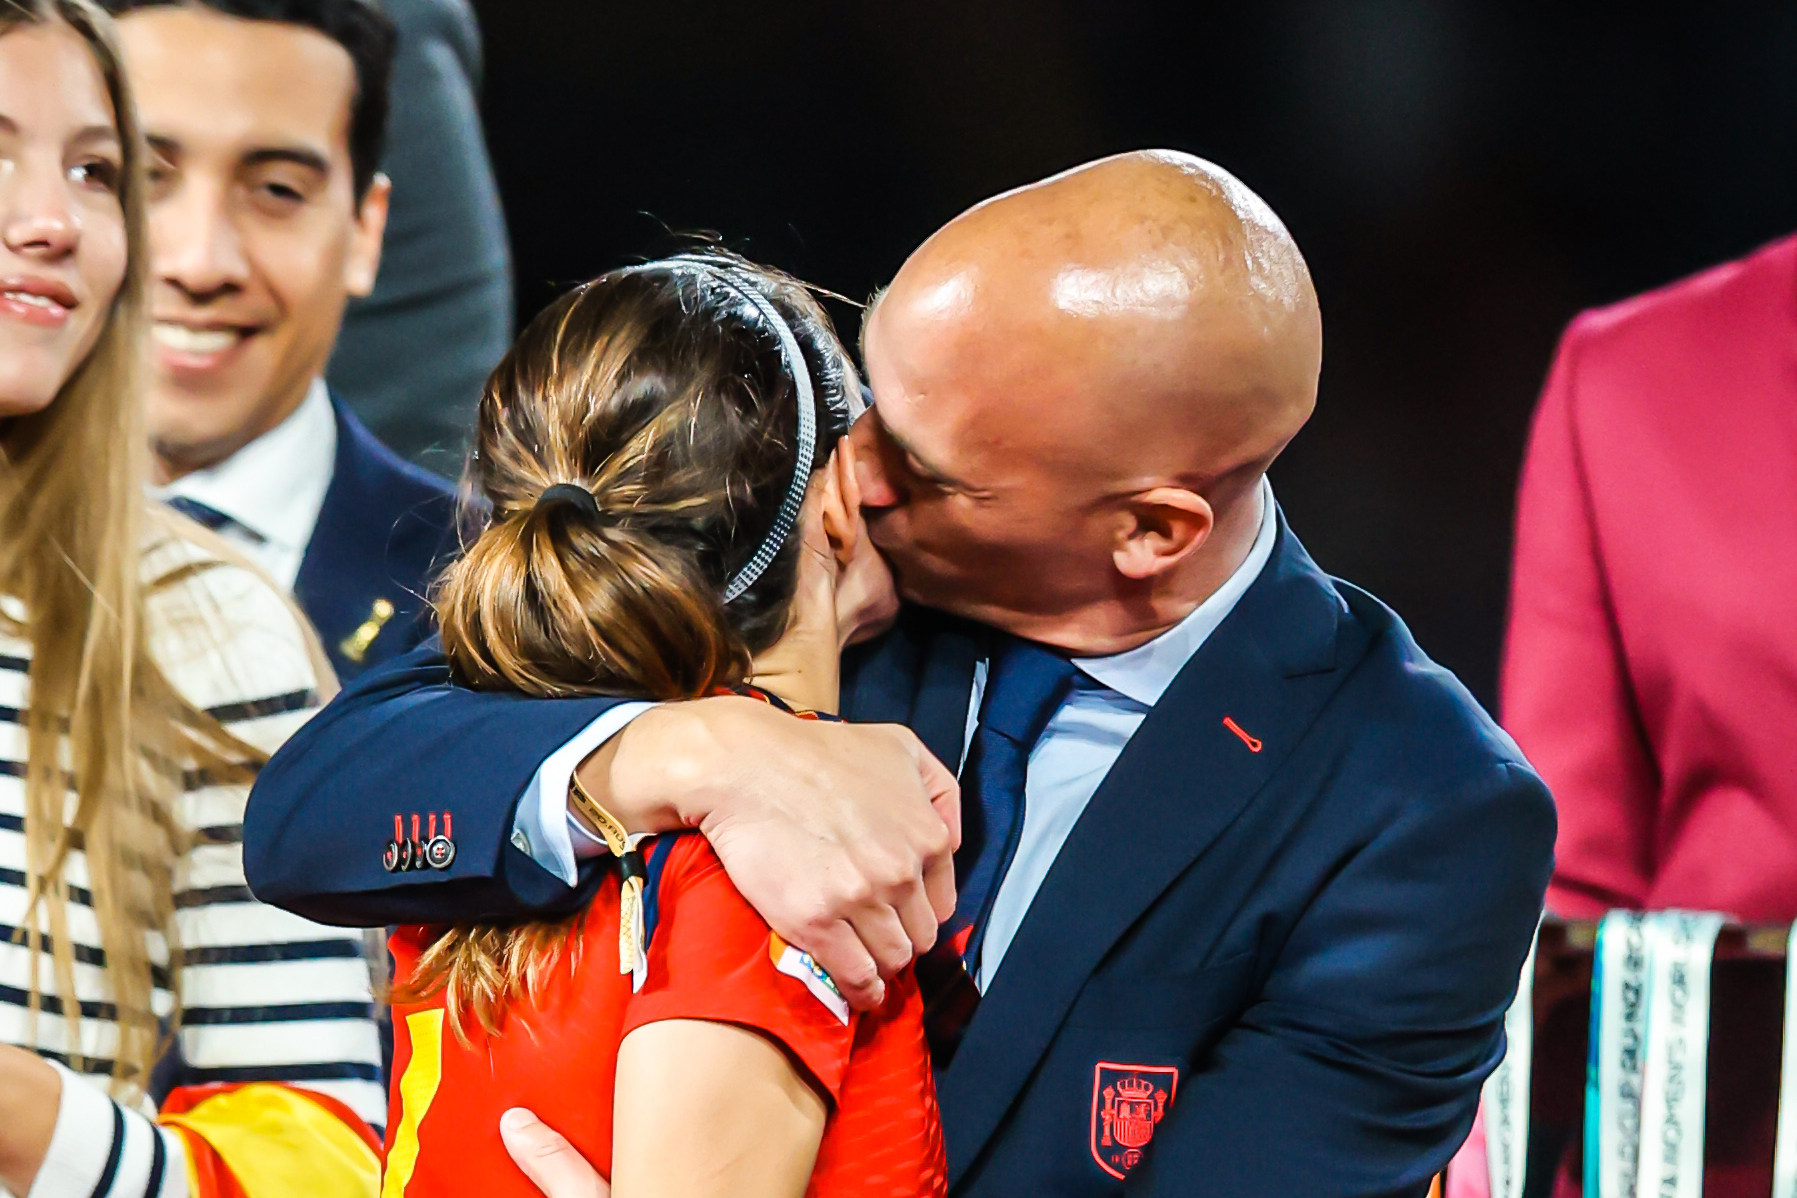 Spanish football federation president Luis Rubiales kisses another Spain player, Aitana Bonmati, after Sunday’s Women’s World Cup final in Sydney. Photo: dpa